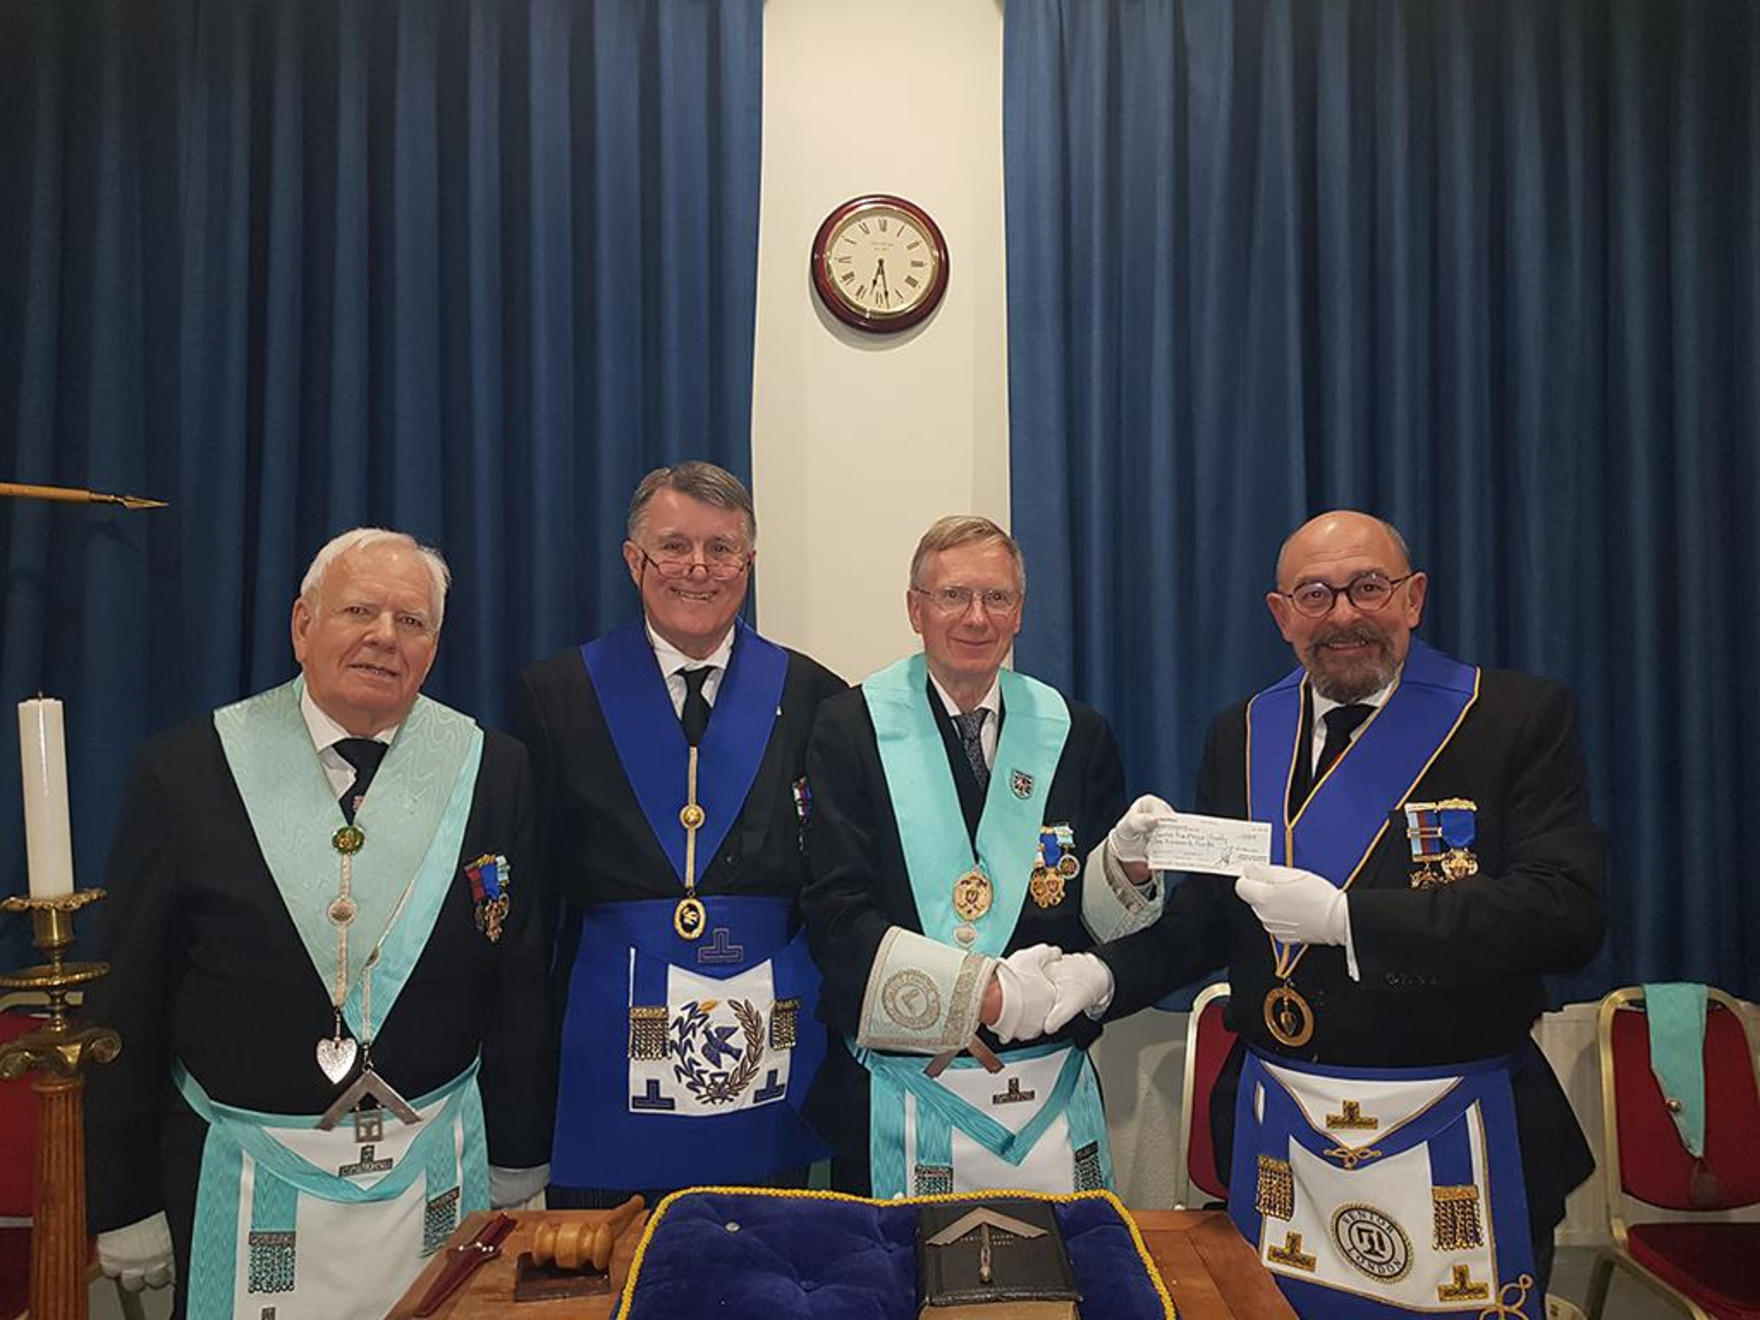 Triple the fun at Imperial Cadet Lodge No 3824